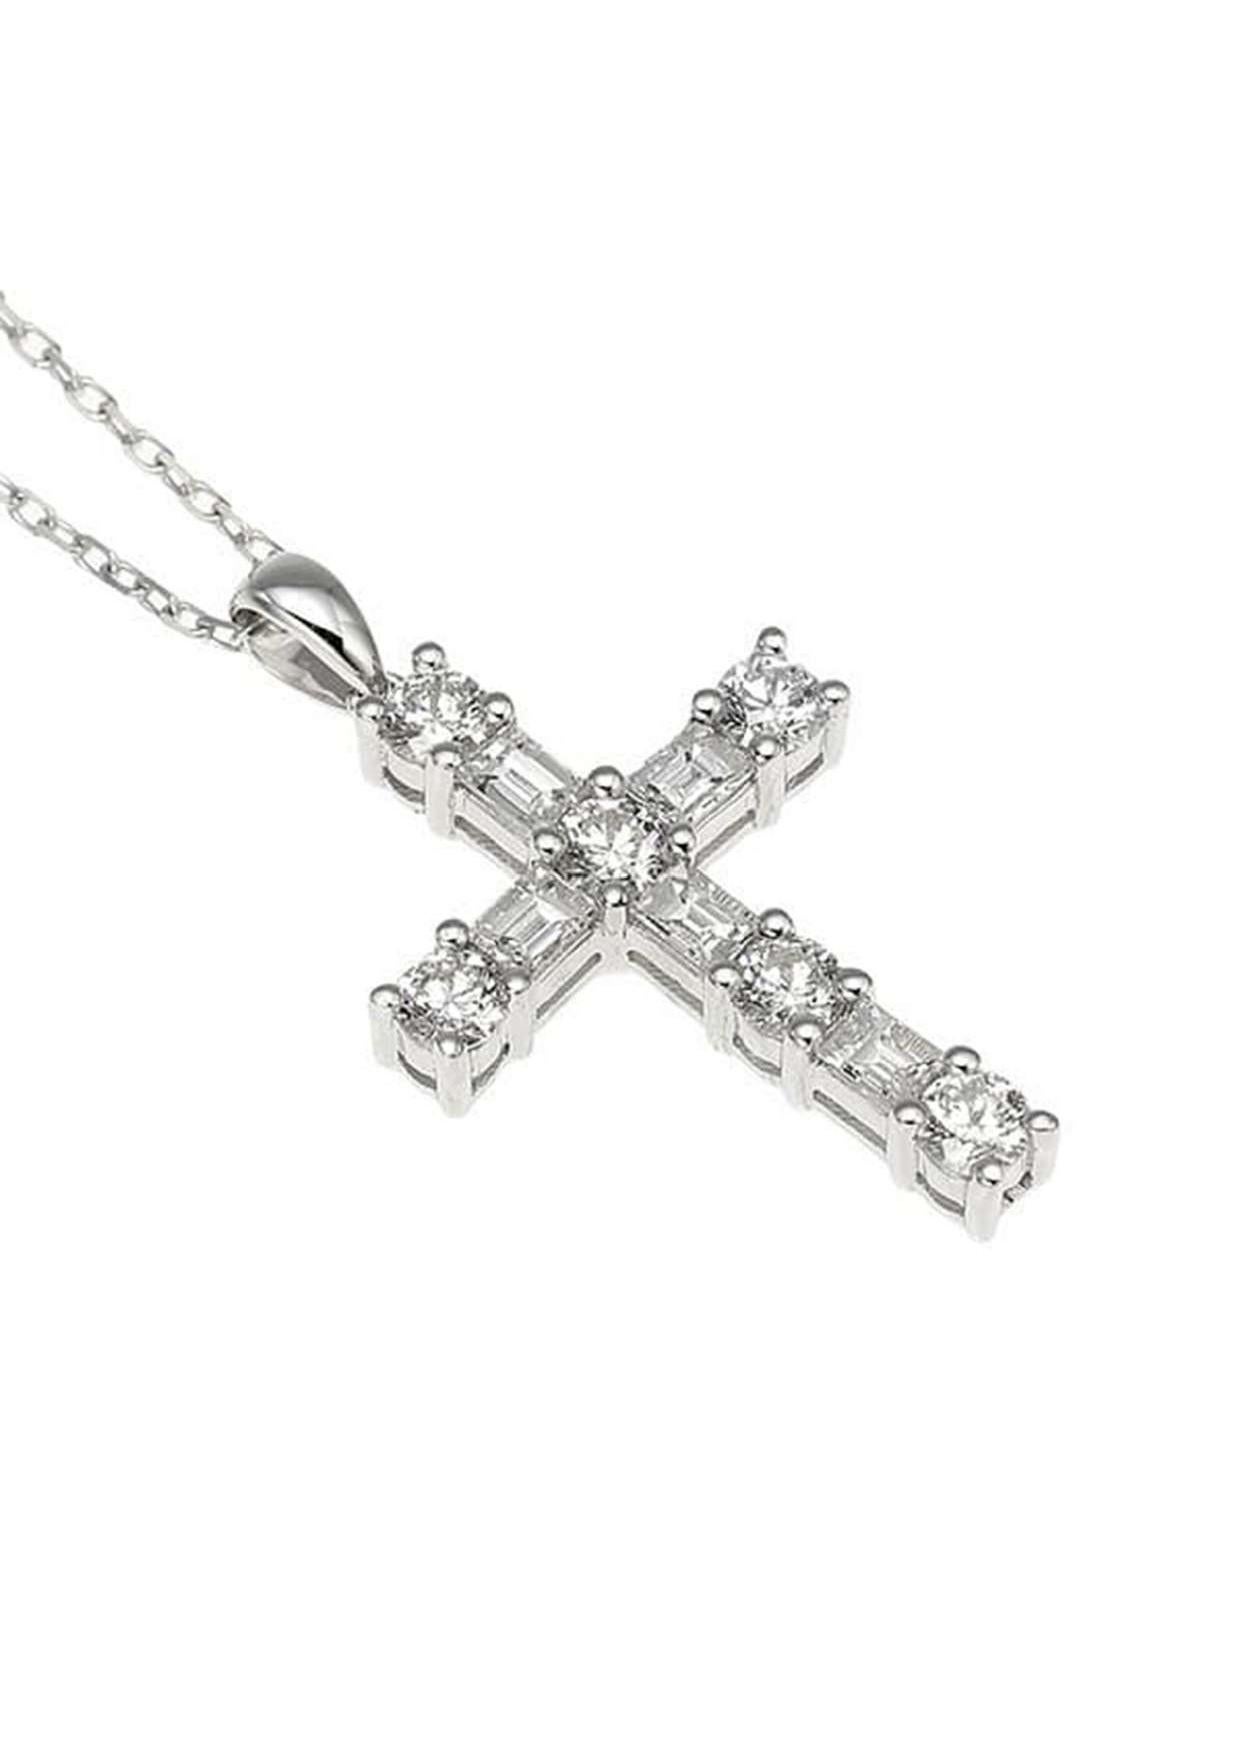 Elevate your faith and style with this exquisite 18K White Gold Diamond Cross Pendant Necklace, featuring a radiant 0.62ct diamond.

Details:

* SKU: cin392
* Material: 18K White Gold
* Jewelry Type: Necklace/Pendant Top
* Pendant Size: Approx.